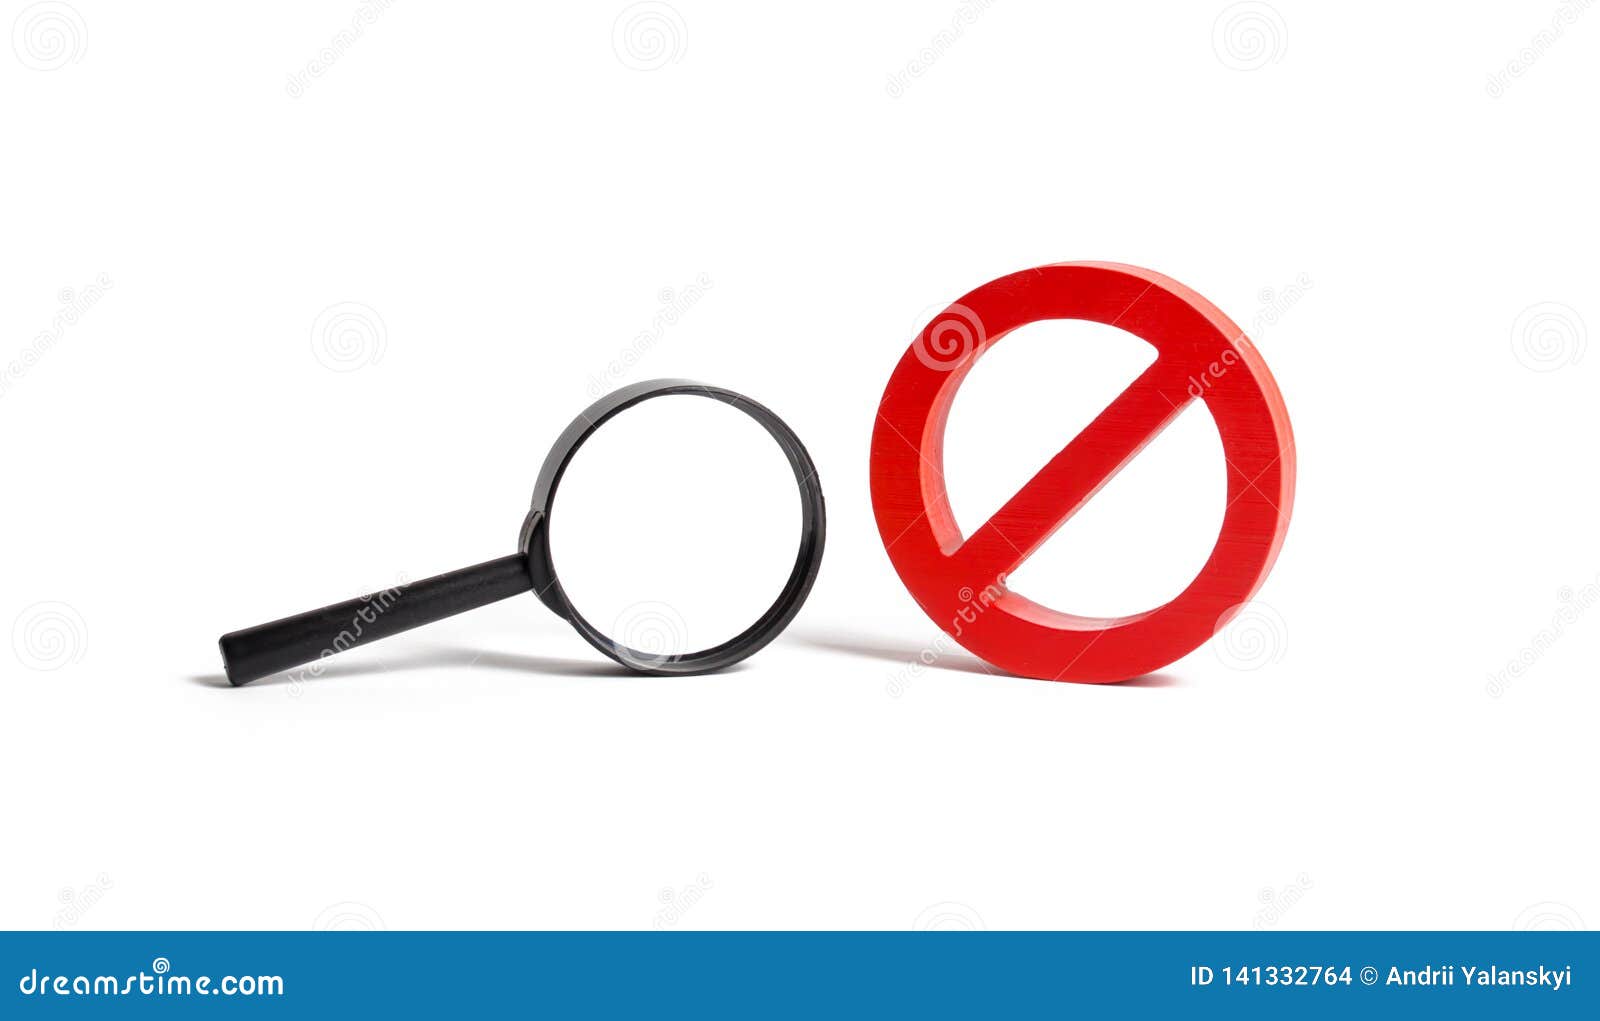 magnifying glass and  no on an  background. search and inability to find. no search results. find the information